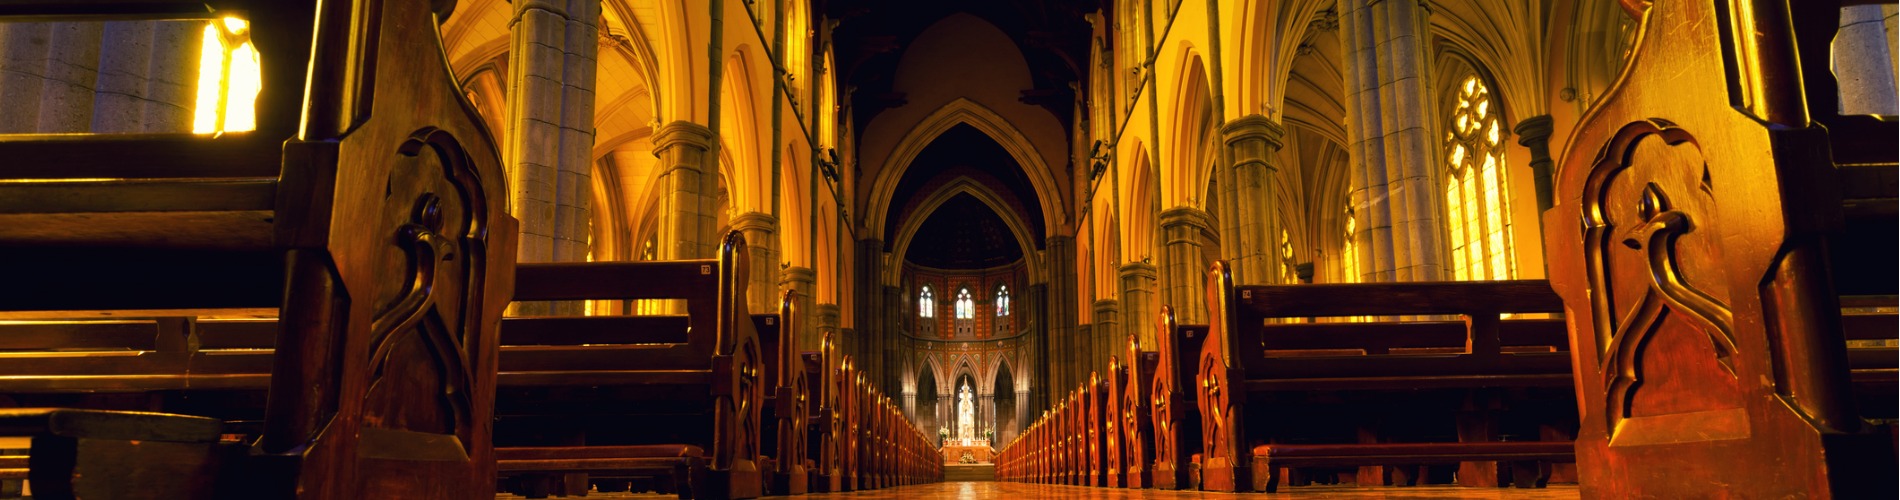 st-patricks-cathedral 1900x500